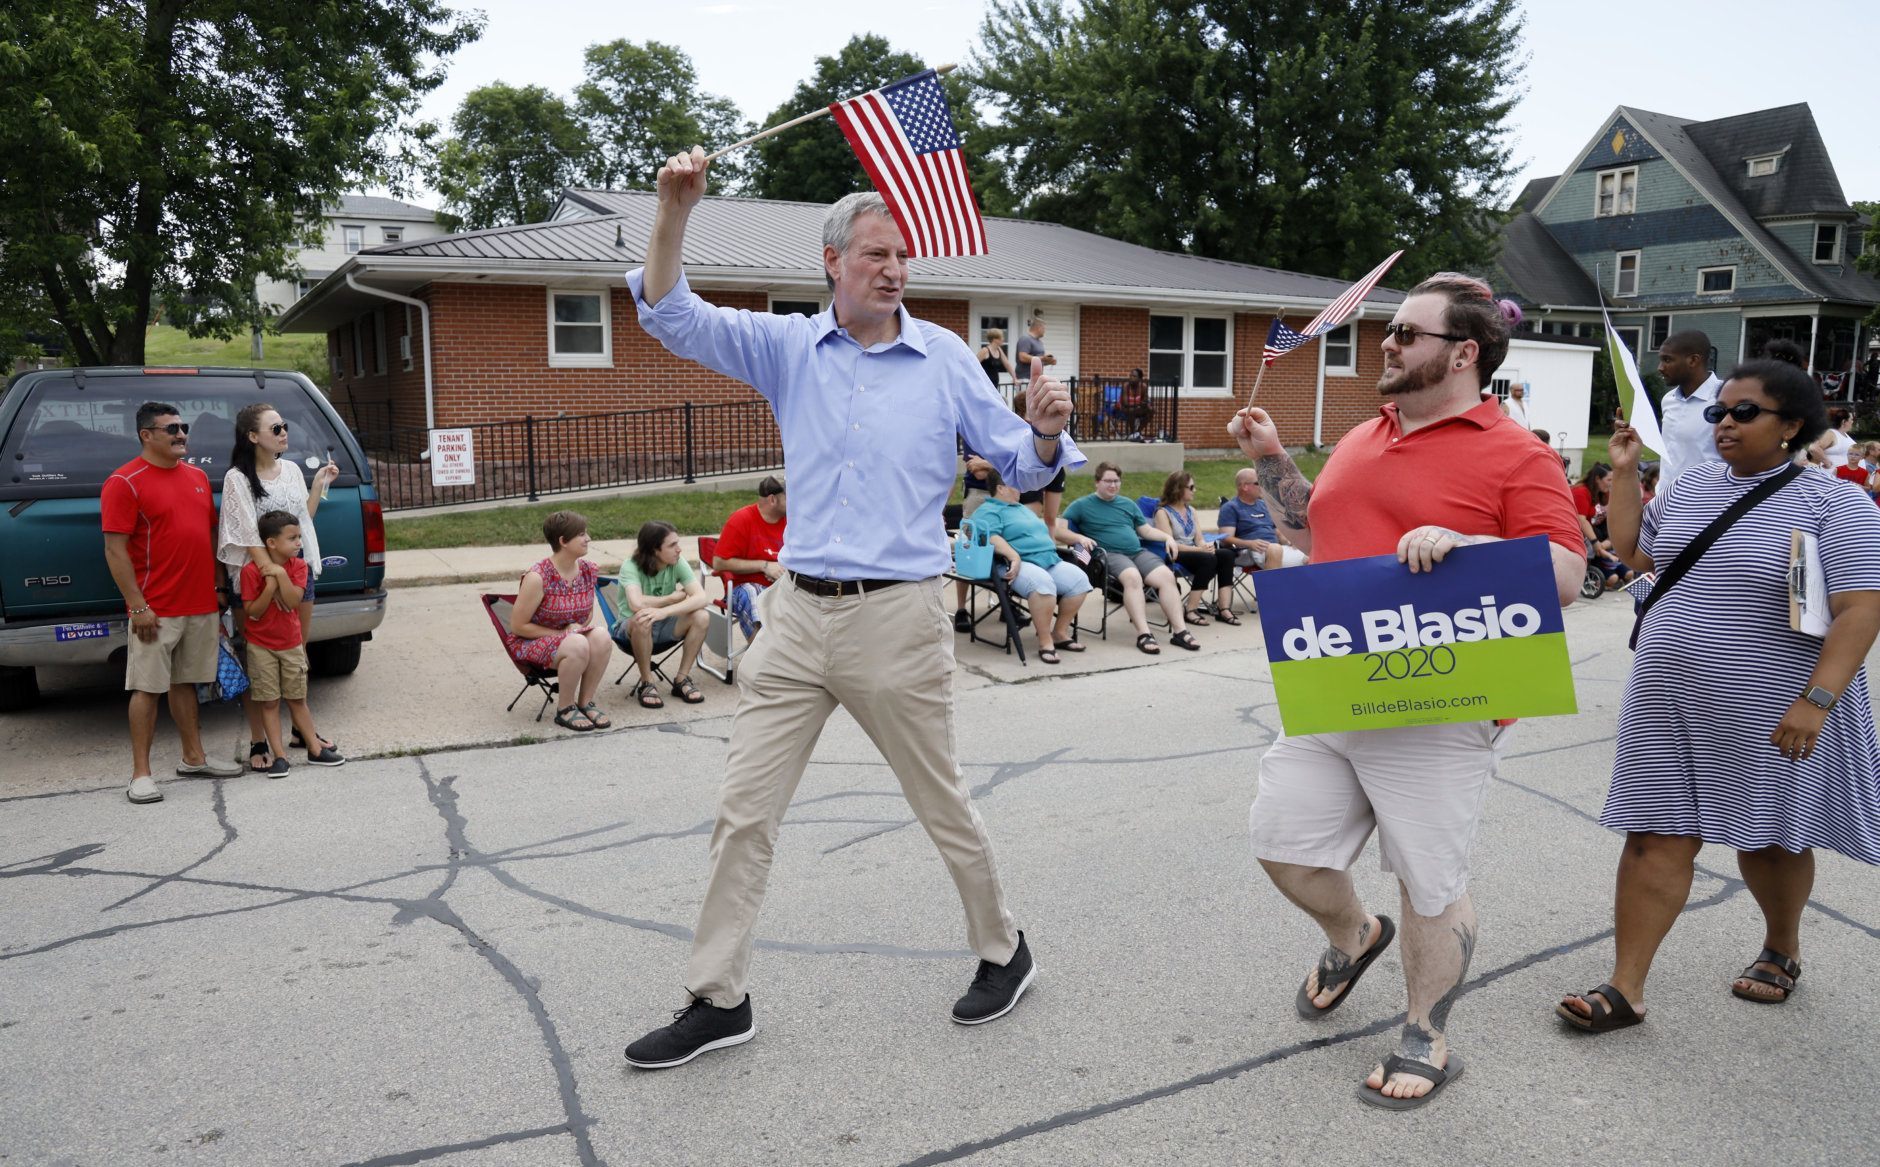 Democratic presidential candidate New York Mayor Bill DeBlasio walks in the Independence Fourth of July parade, Thursday, July 4, 2019, in Independence, Iowa. (AP Photo/Charlie Neibergall)